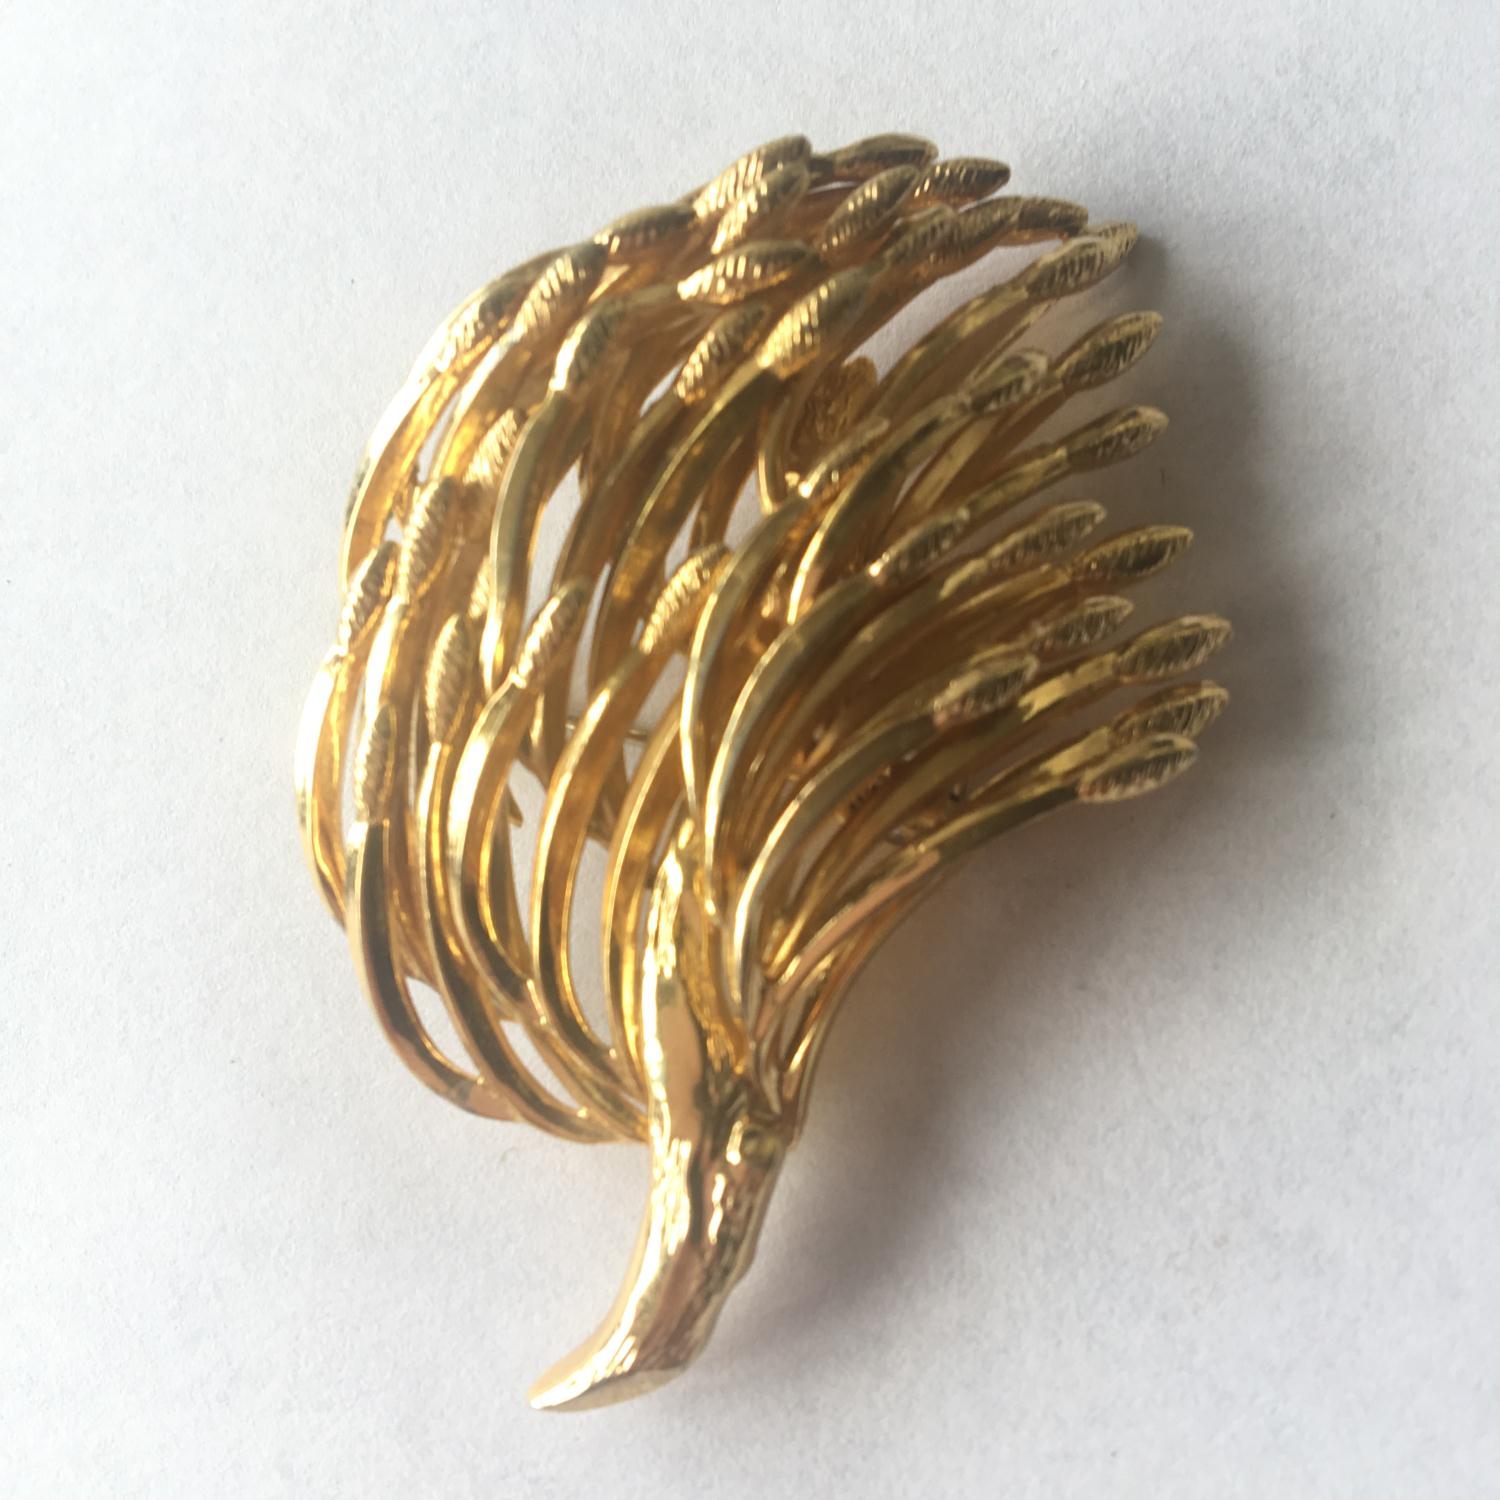 Vintage designer pin brooch by Grosse of Germany. Includes free UK delivery.